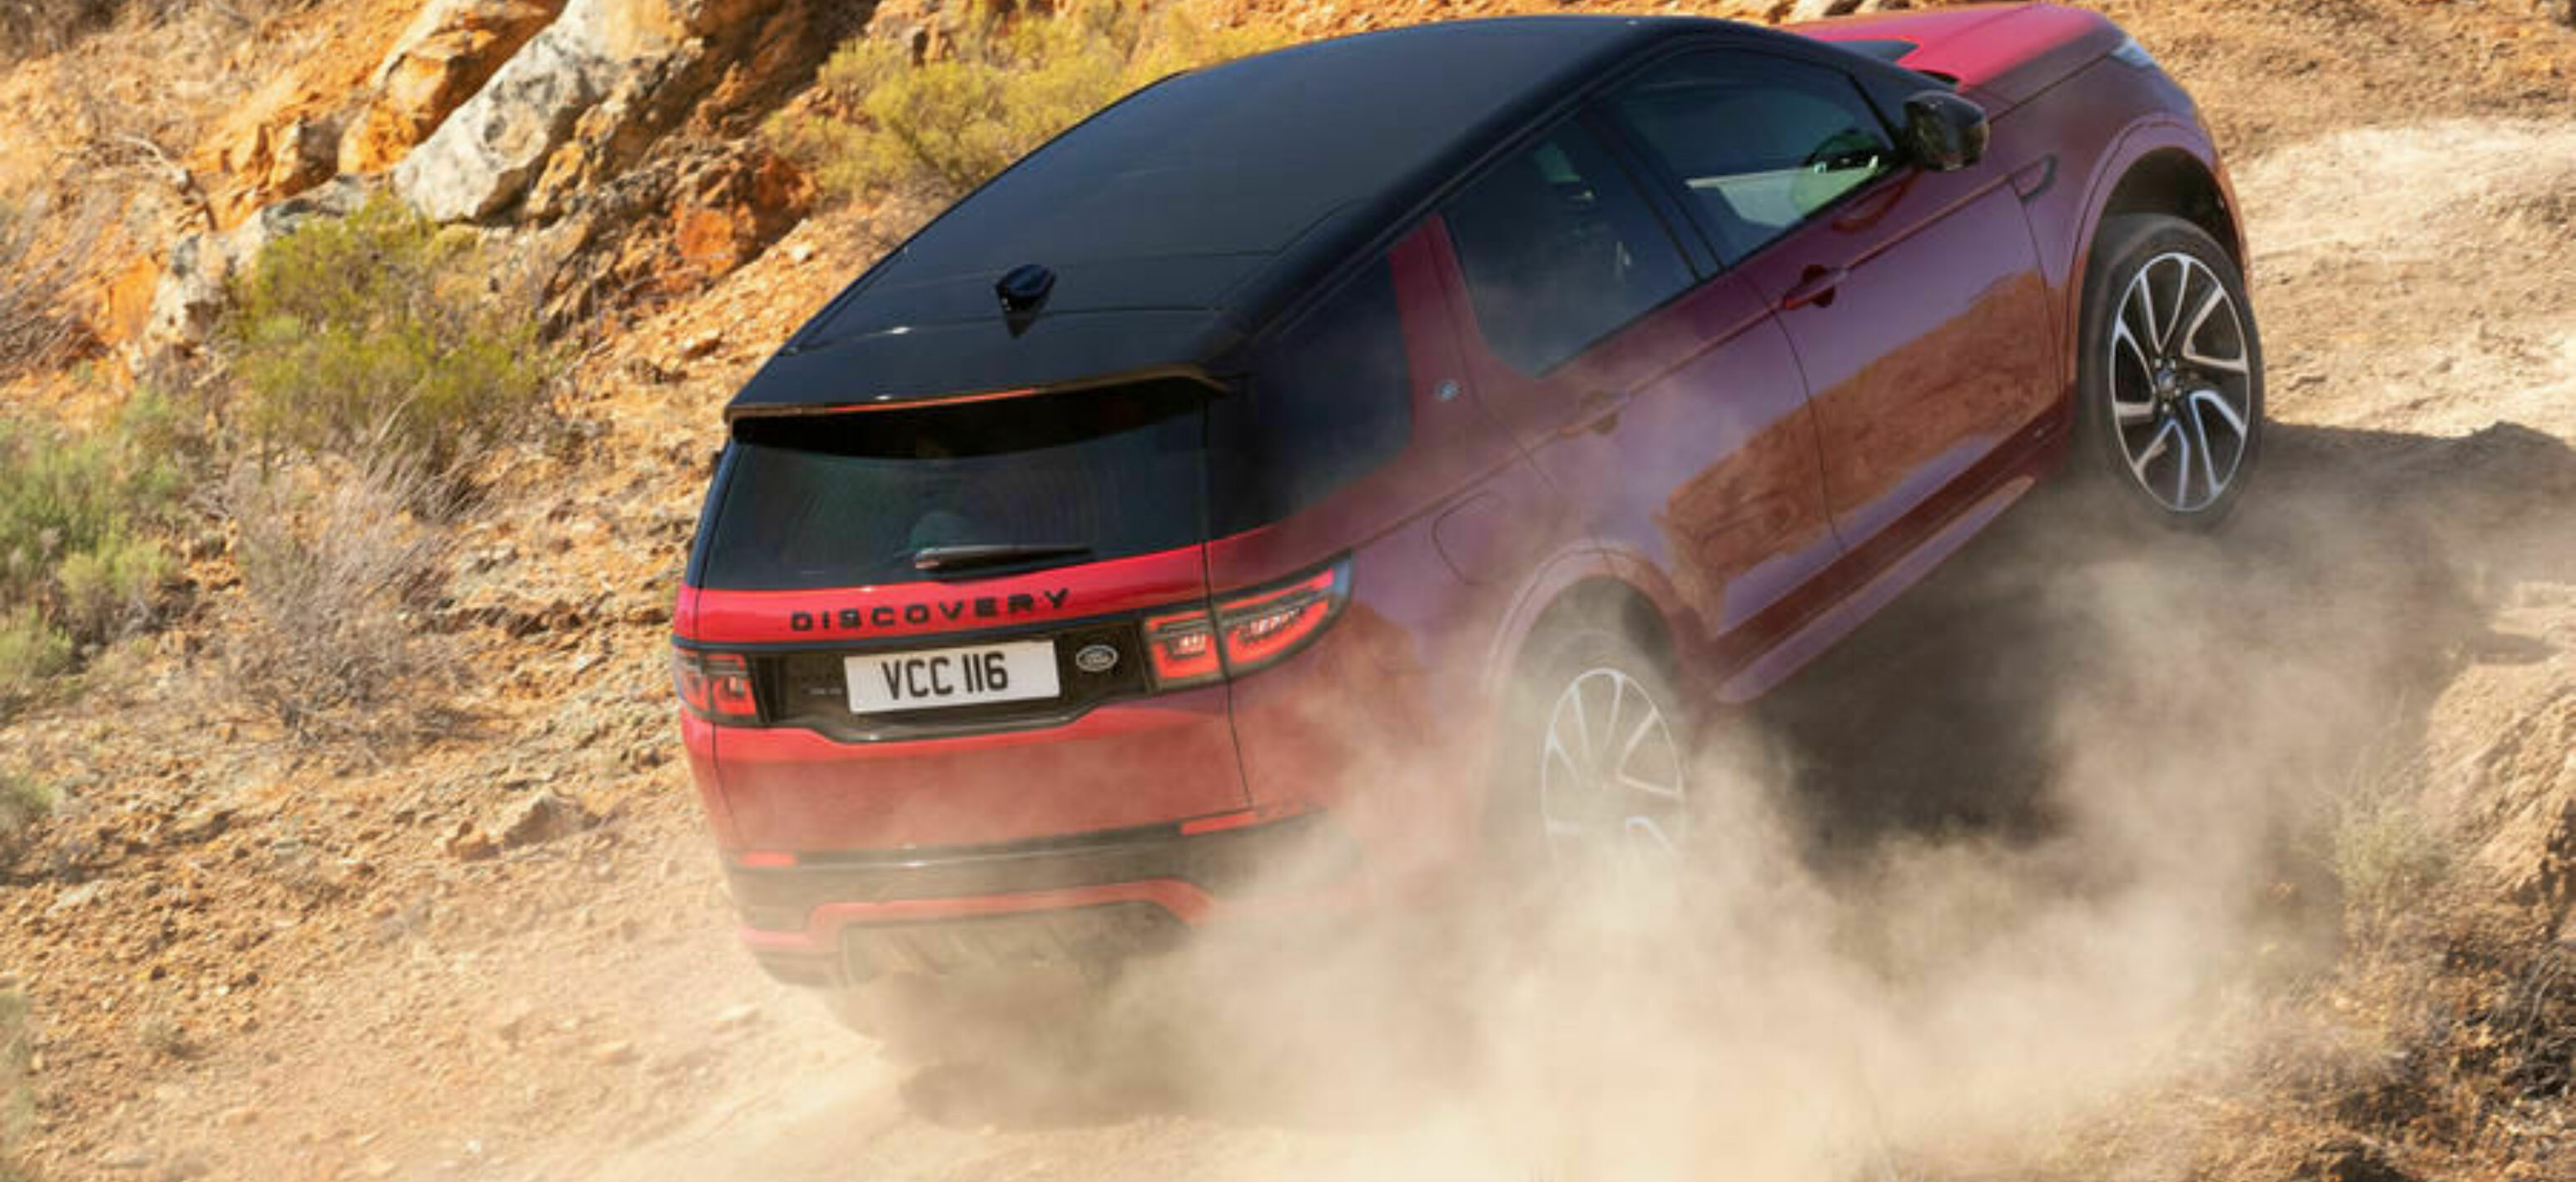 https://autofilter.sk/assets/images/discovery-sport/gallery/94-land-rover-discovery-sport-2019-official-pics-offroad-rear_01-galeria.jpg - obrazok